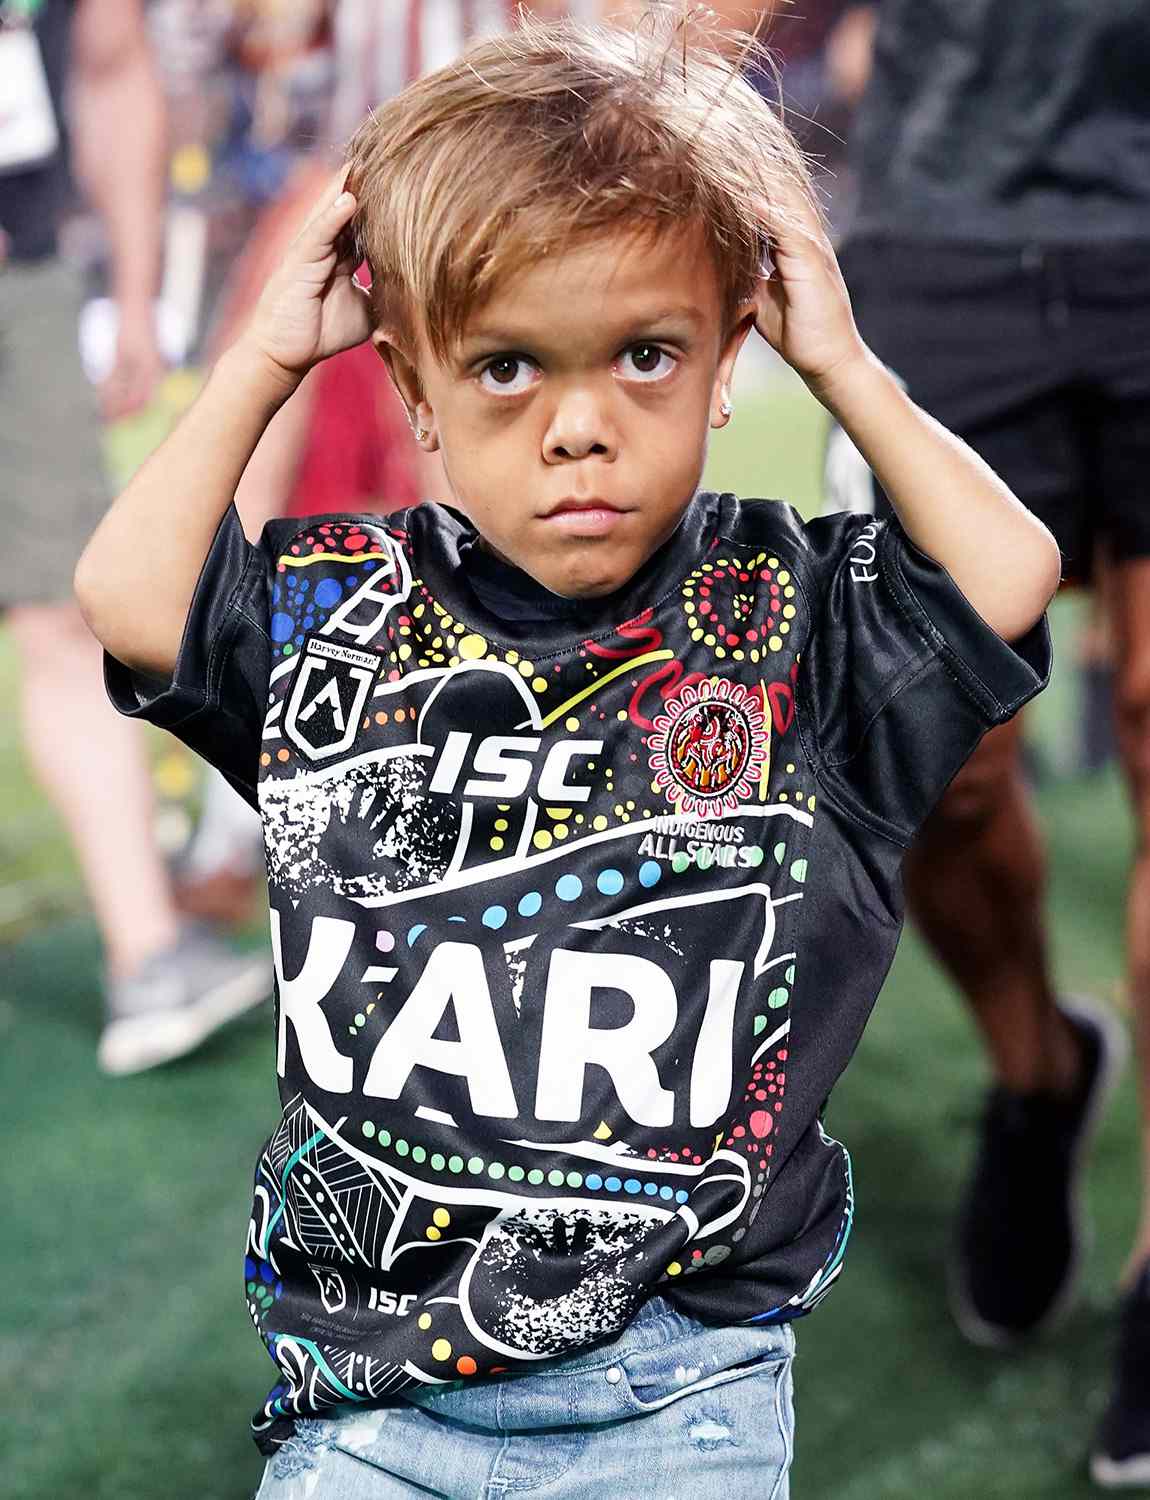 Quaden Bayles poses for a photo during the National Rugby League (NRL) Indigenous All-Stars vs Maori Kiwis match at Cbus Super Stadium on the Gold Coast, Australia, 22 February 2020 issued (24 February 2020